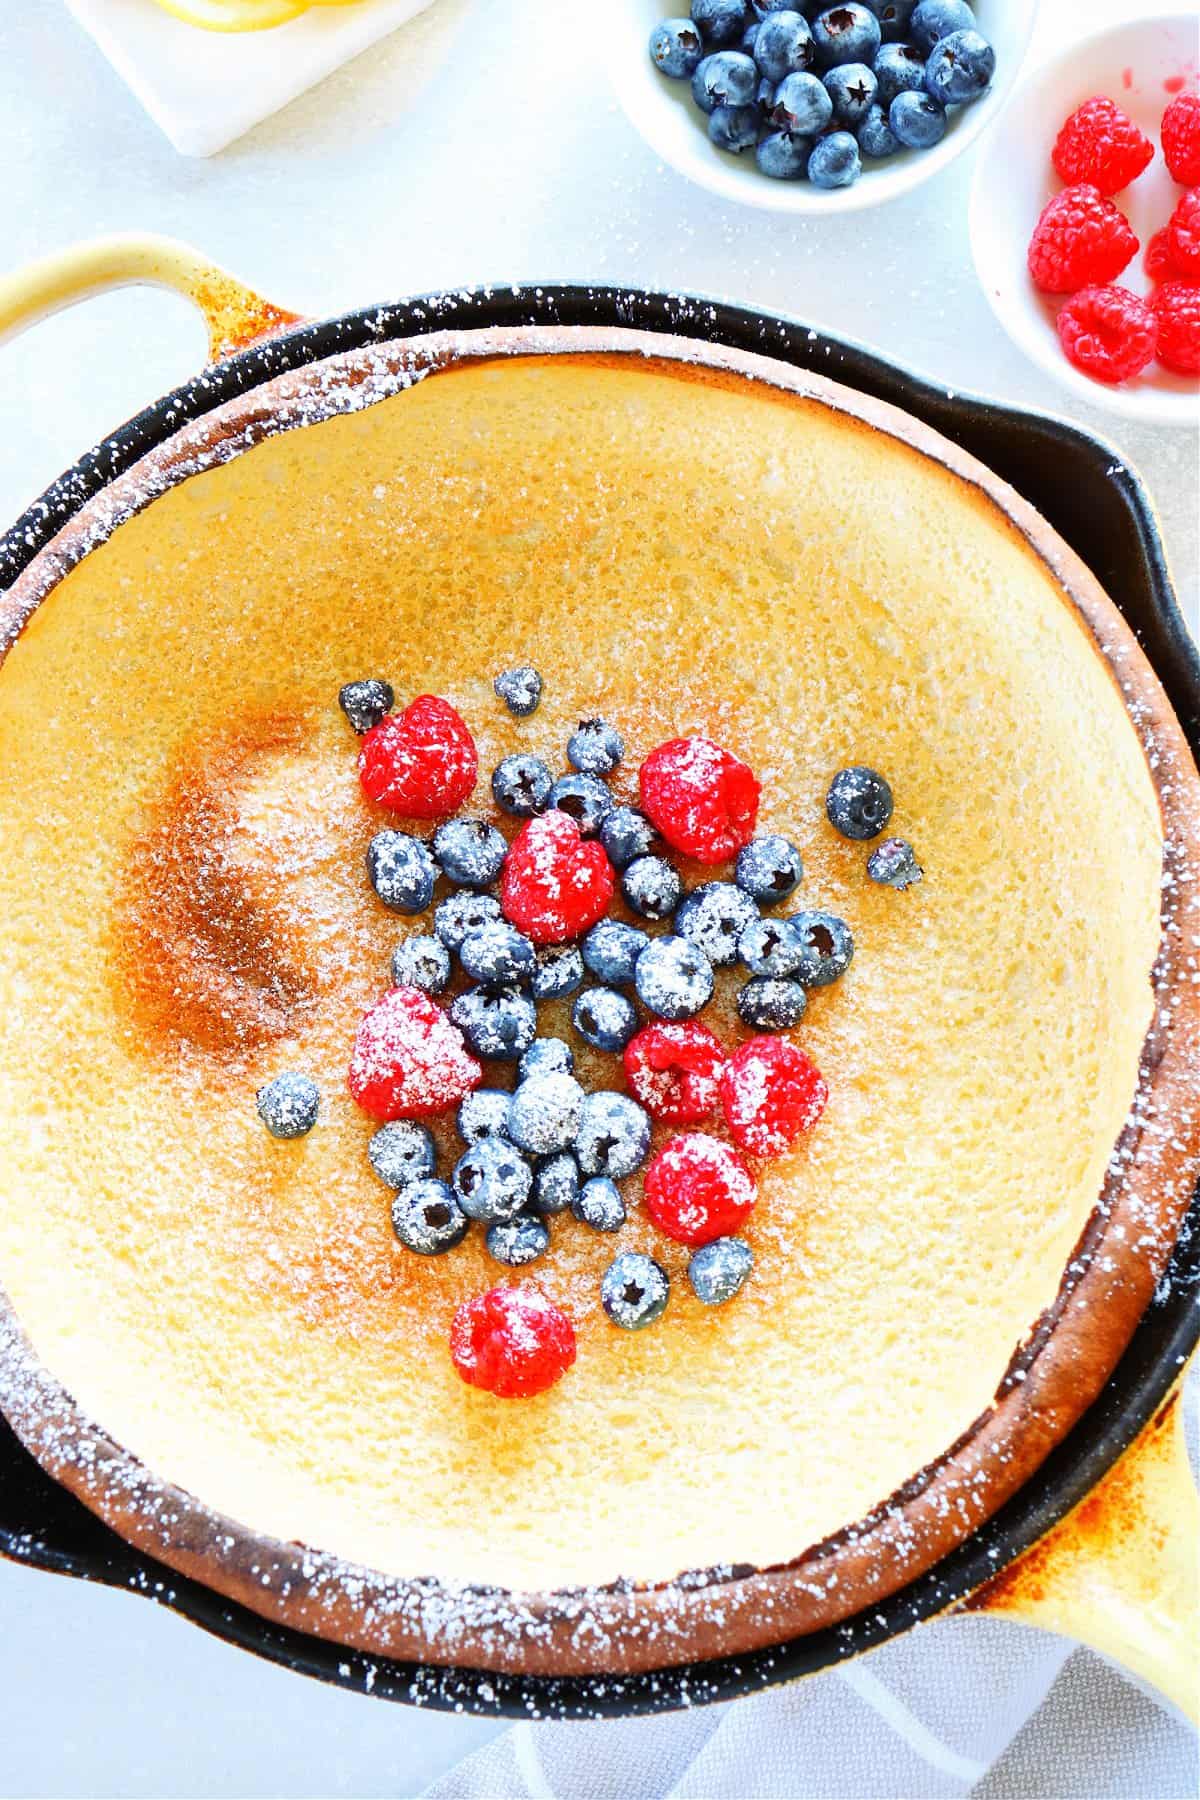 Dutch baby pancake with blueberries and raspberries.